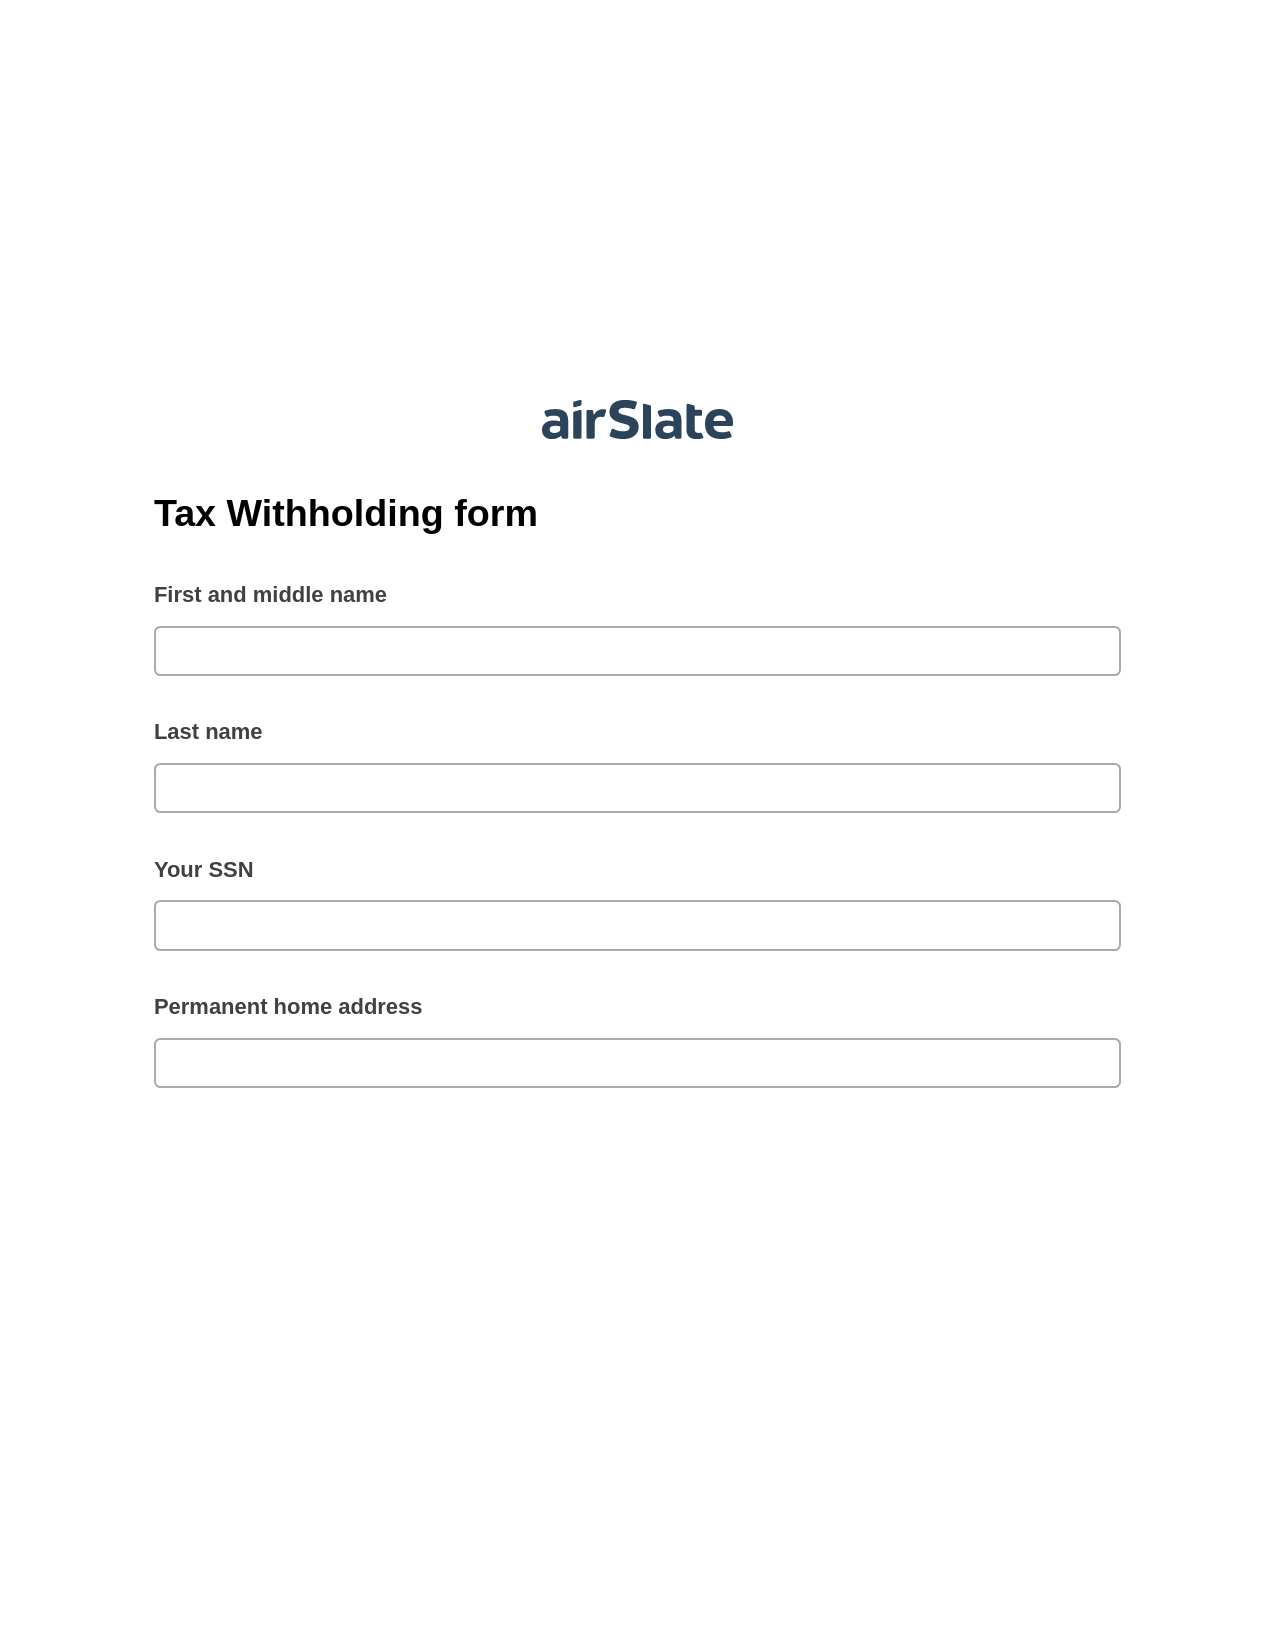 Tax Withholding form Pre-fill from NetSuite Records Bot, Audit Trail Bot, Dropbox Bot